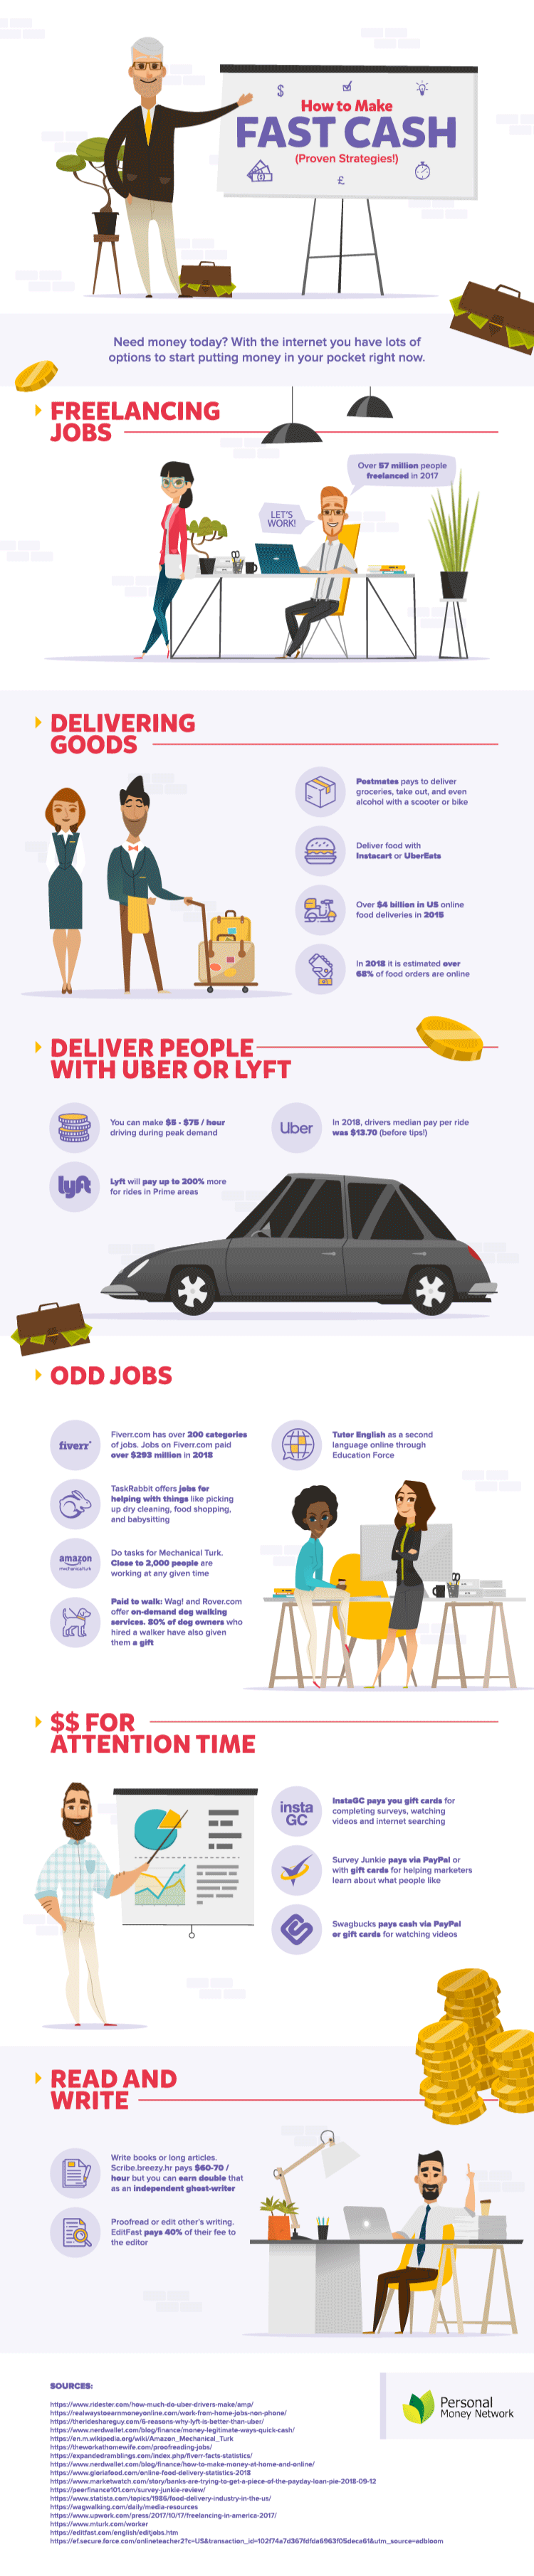 Want to Earn Extra? Here Are Multiple Options! - Infographic